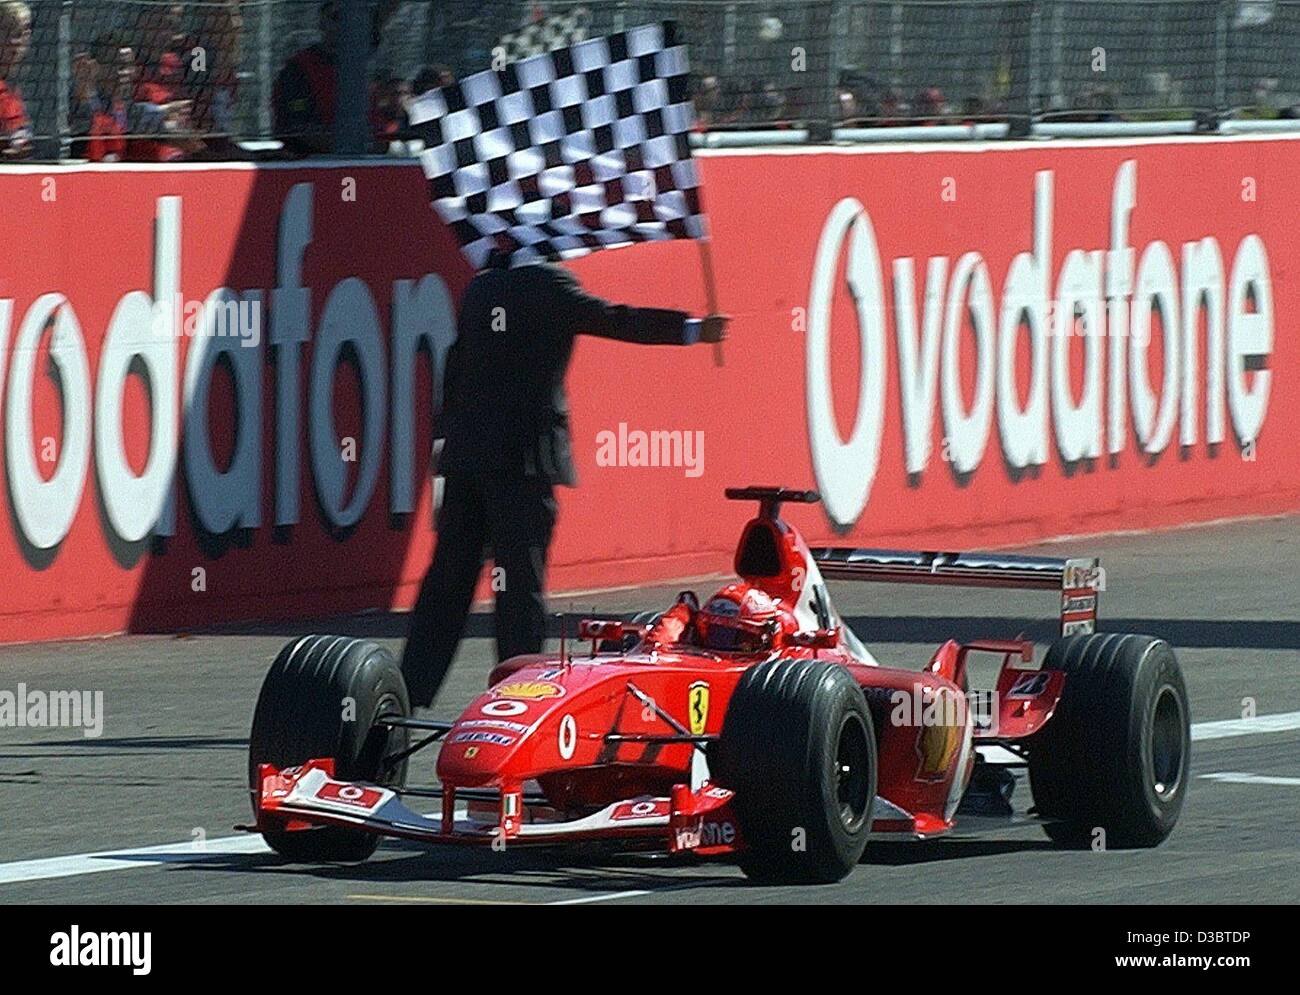 (dpa) - German formula one pilot Michael Schumacher of Ferrari crosses the finish line and wins the Grand Prix of Italy in Monza, 14 September 2003. Schumacher now leads in the overall standings with 82 points. Stock Photo